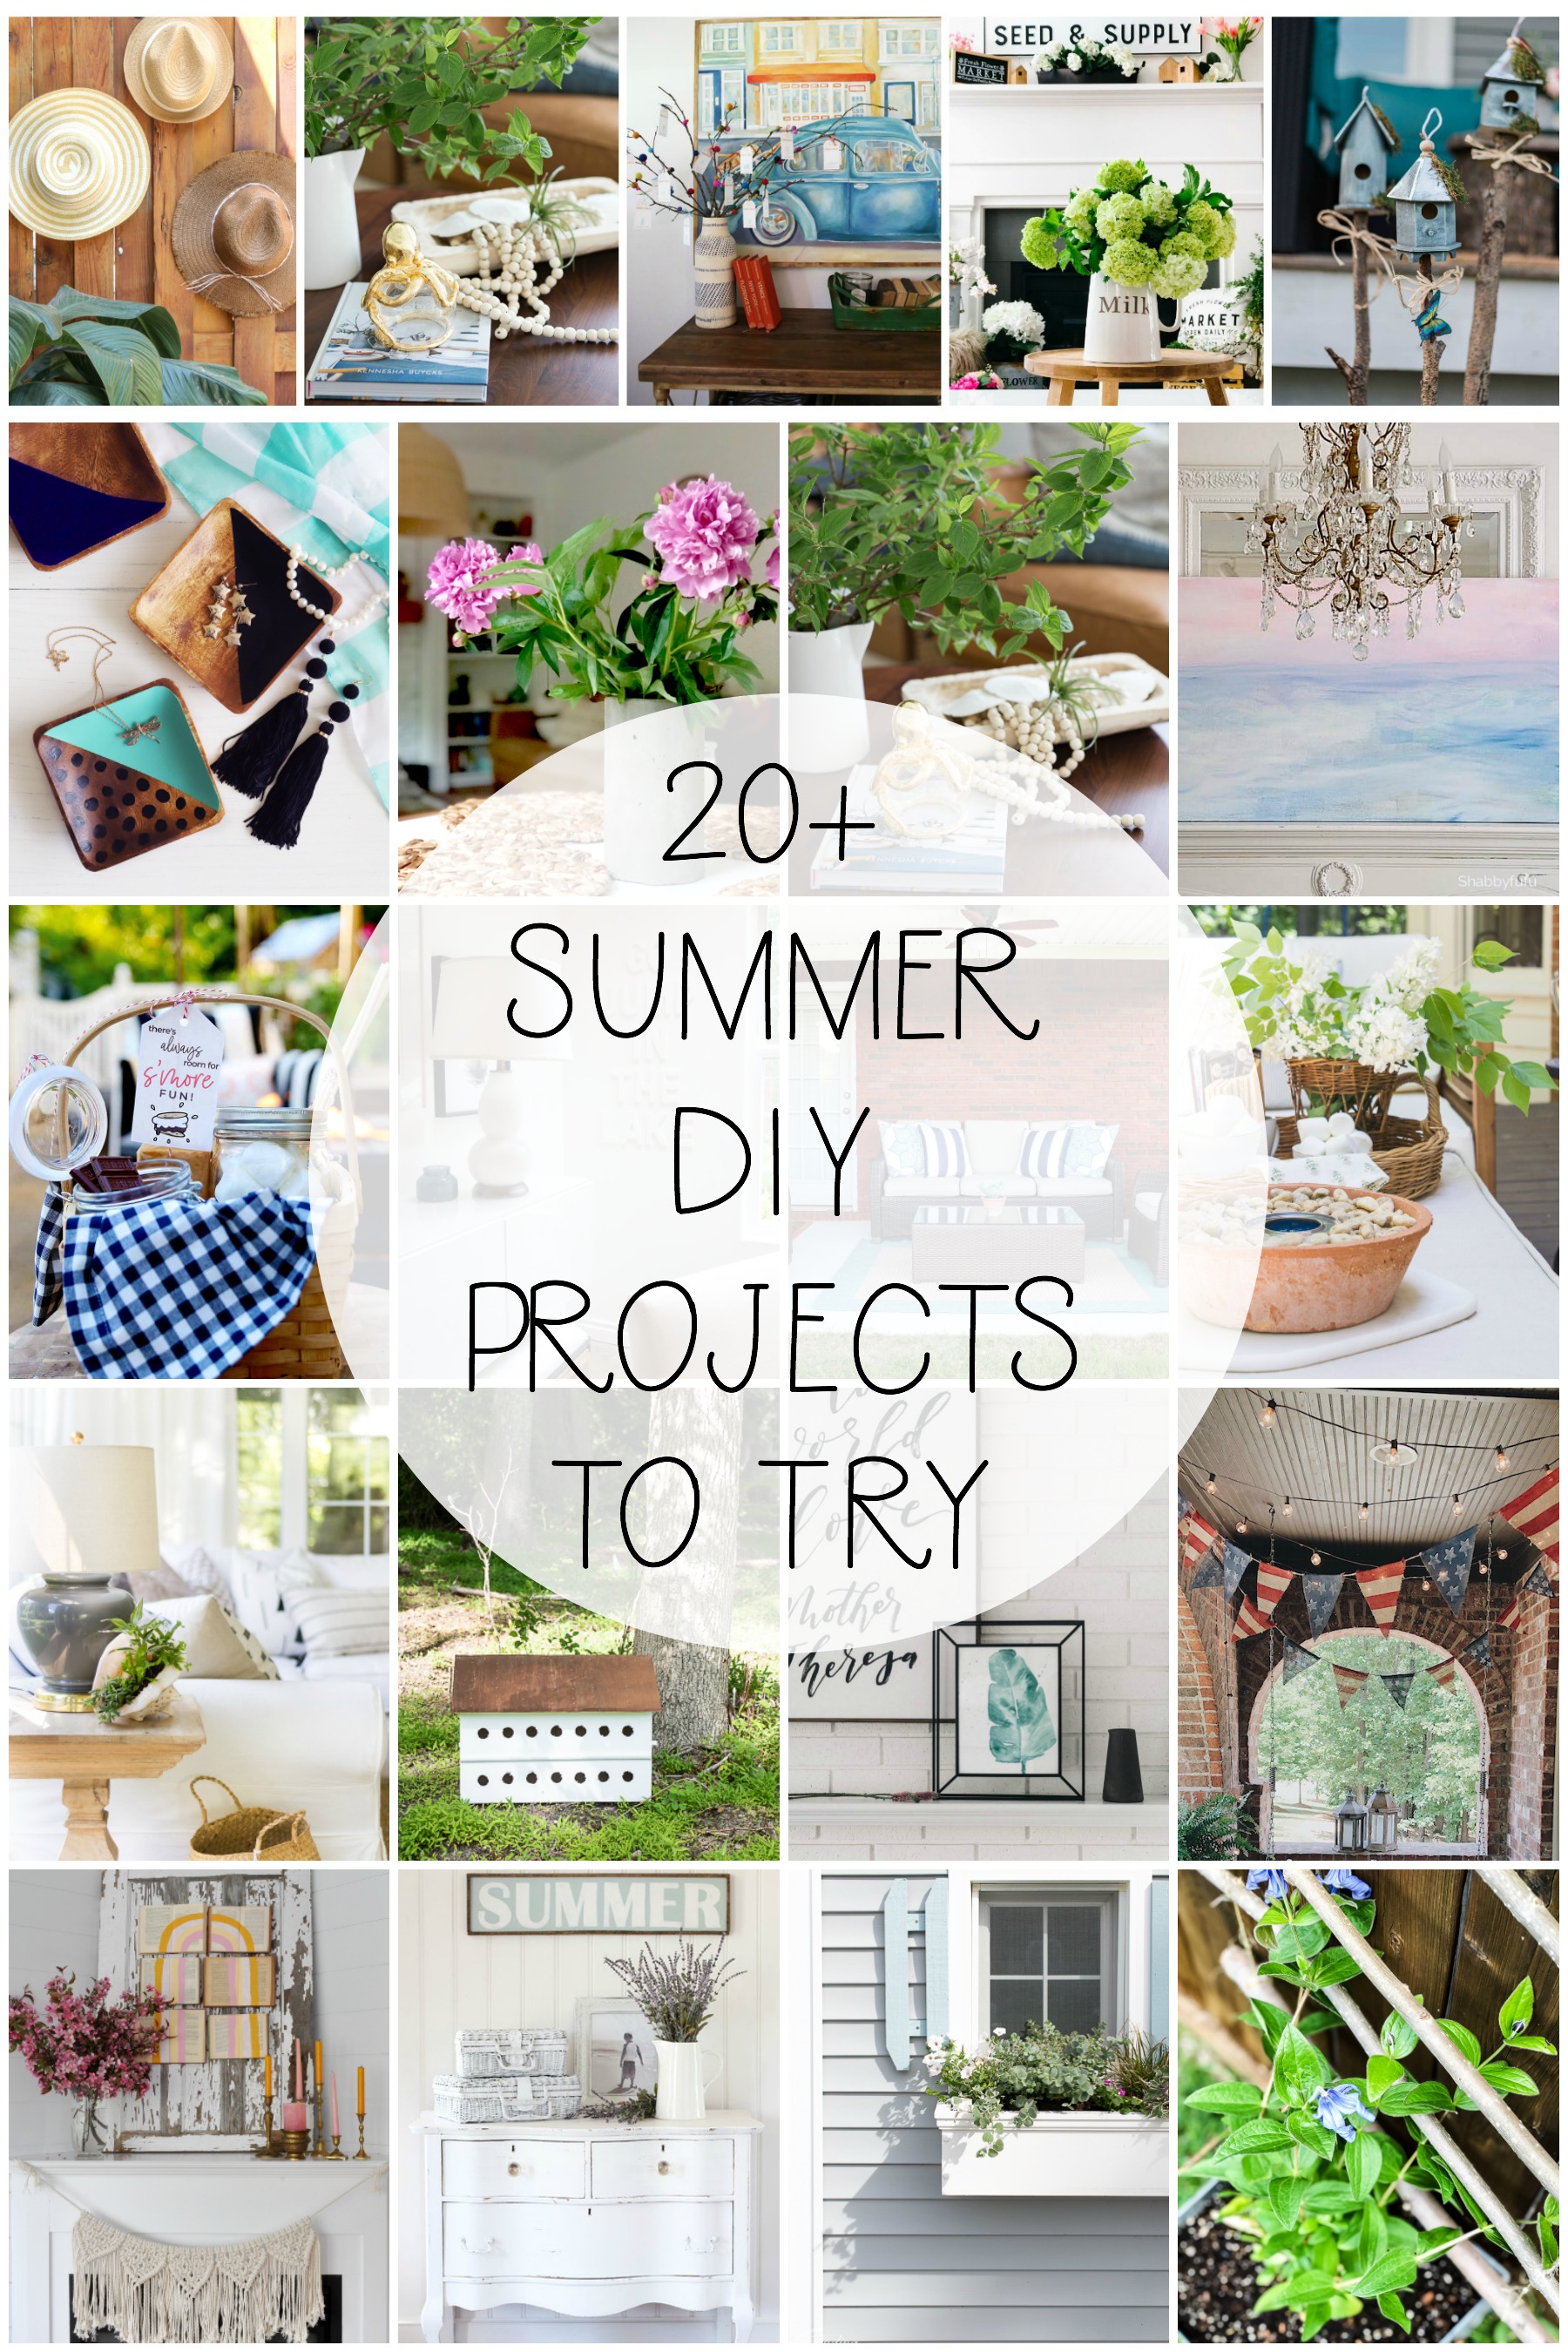 20+ Summer DIY Projects To Try poster.